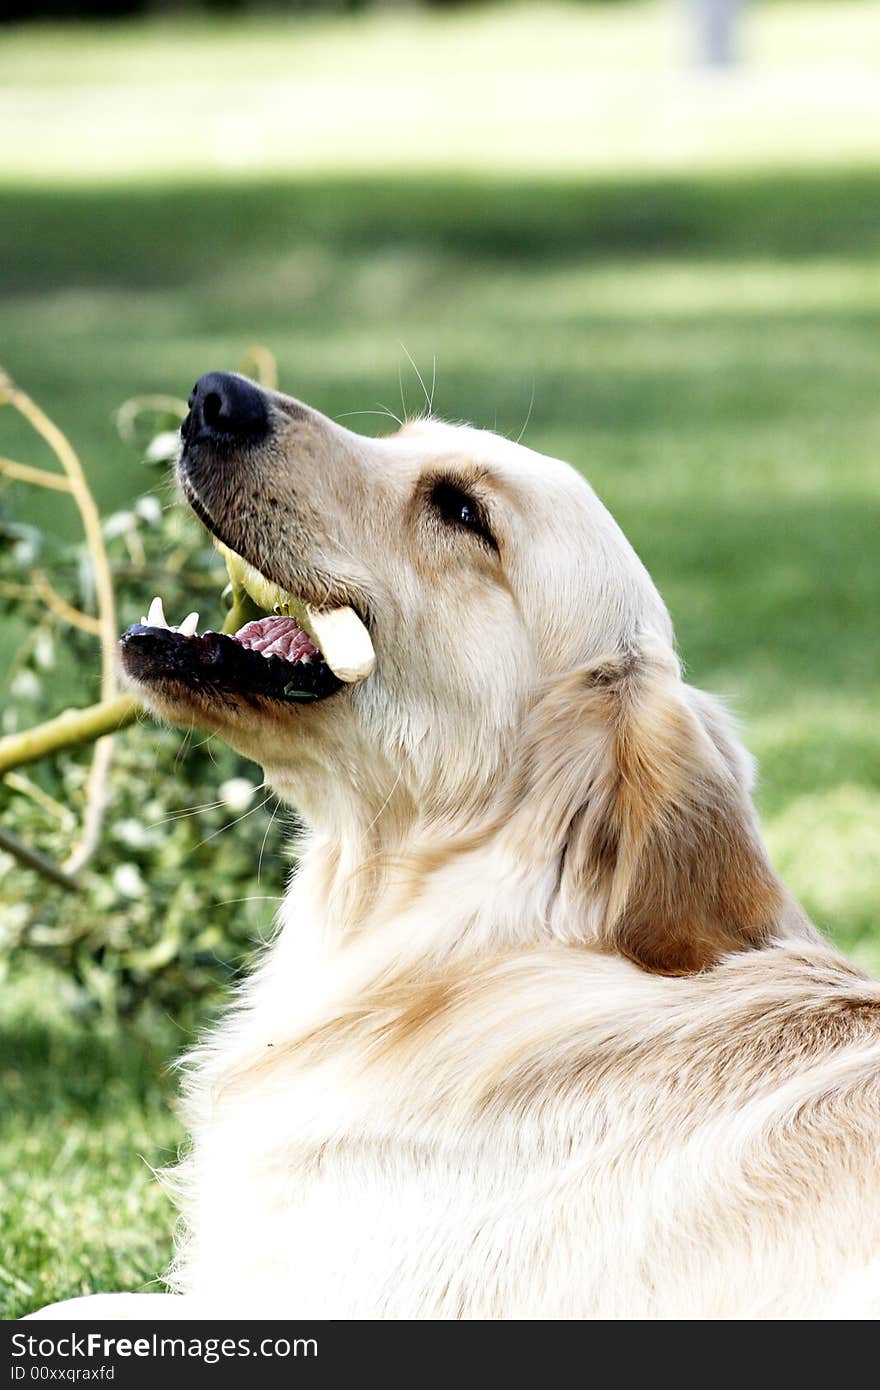 Golden retriever is gnawing the branch at this moment